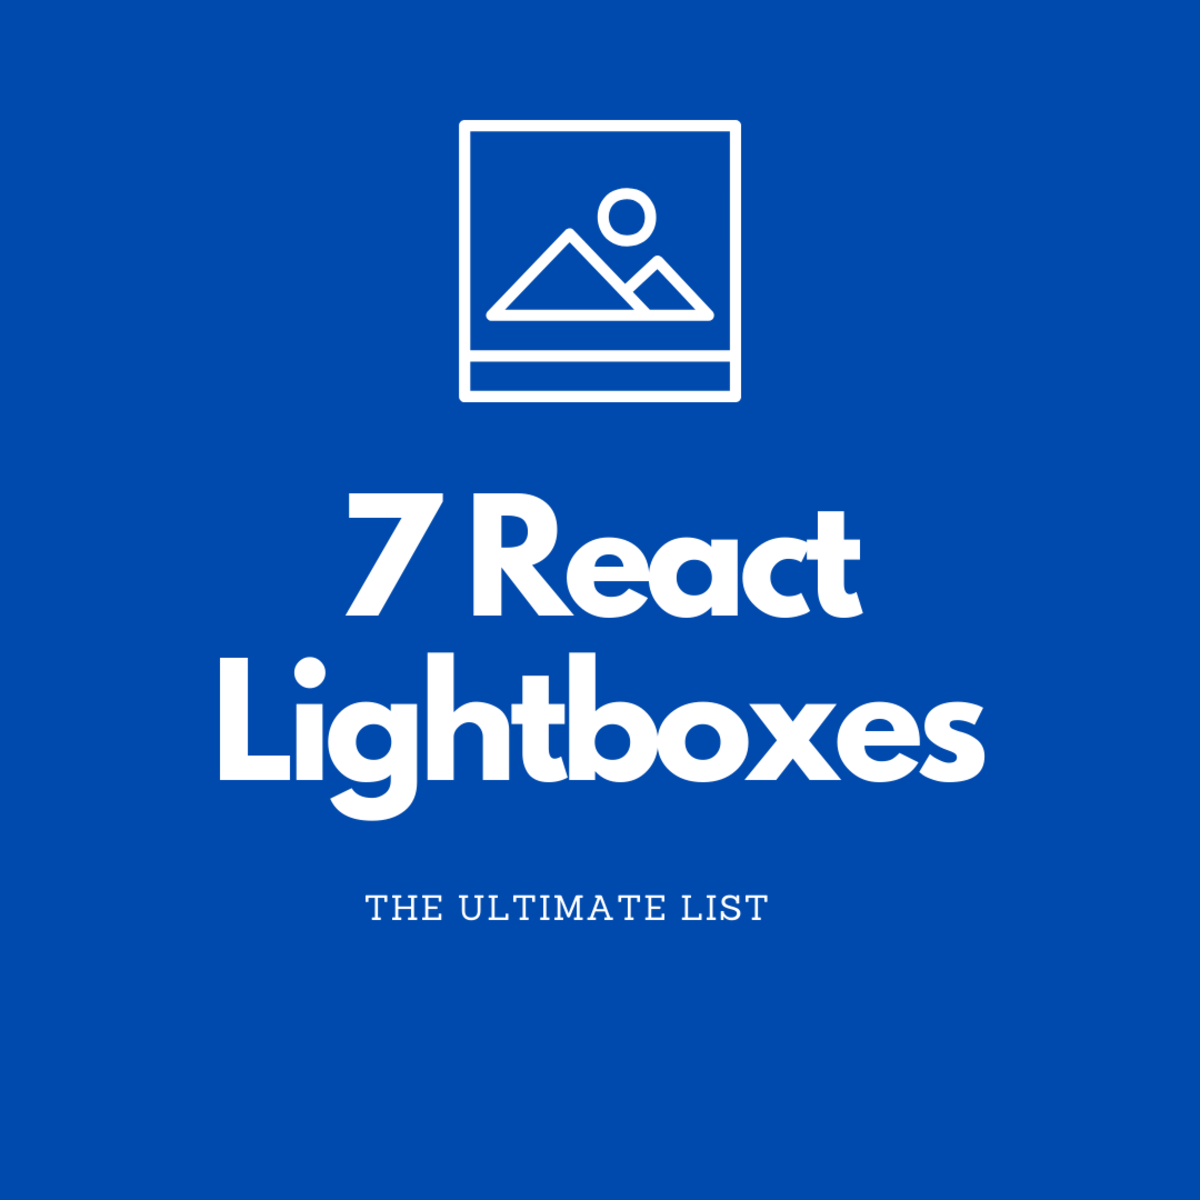 Discover some of the best React lightboxes out there in this ultimate list!